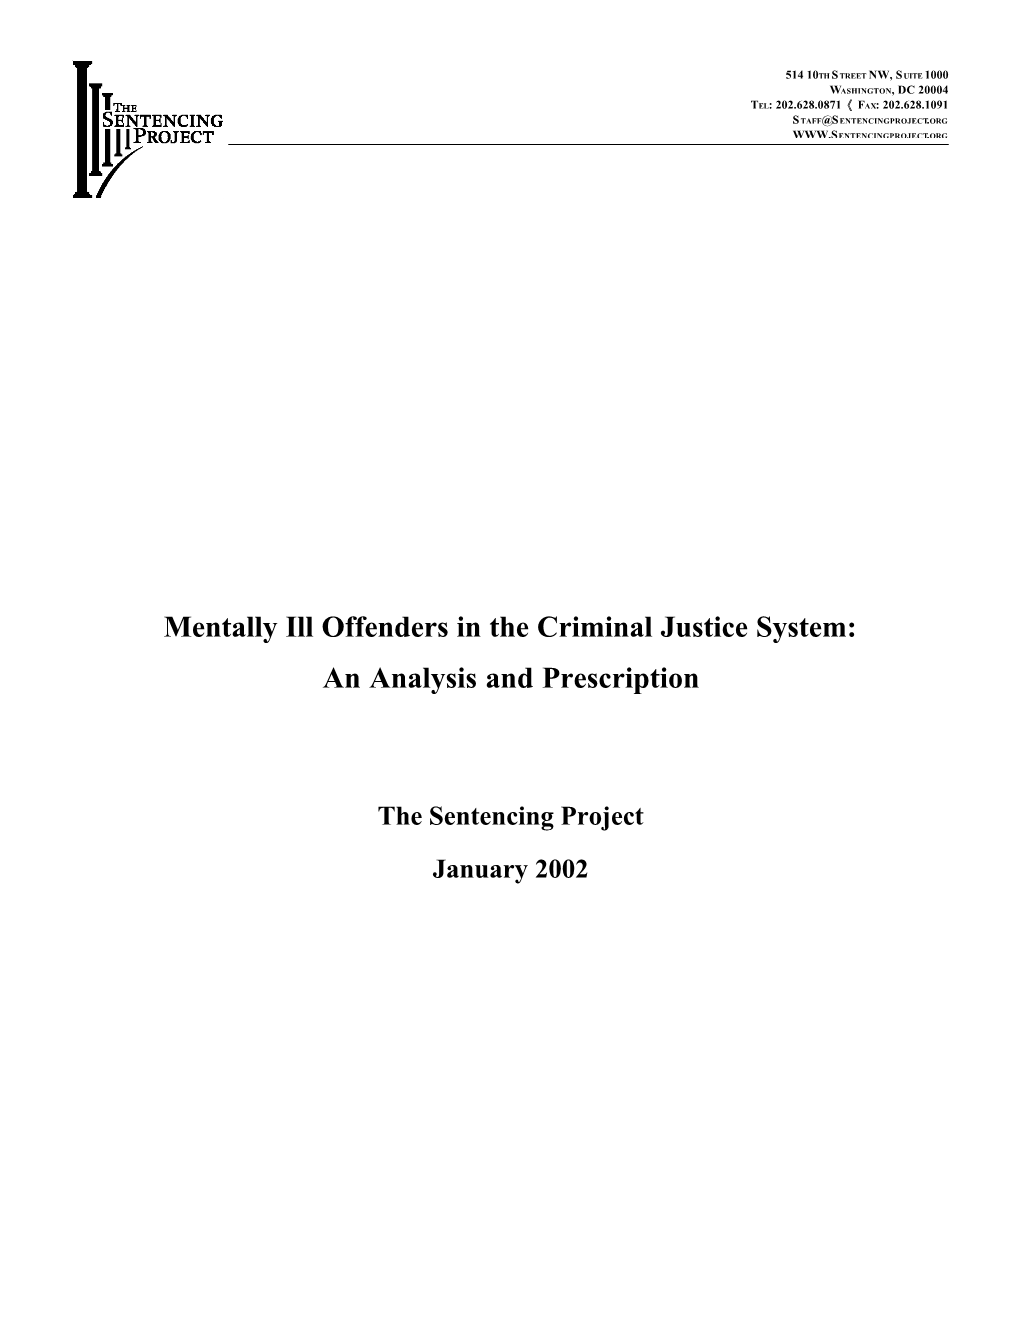 Mentally Ill Offenders in the Criminal Justice System: an Analysis and Prescription